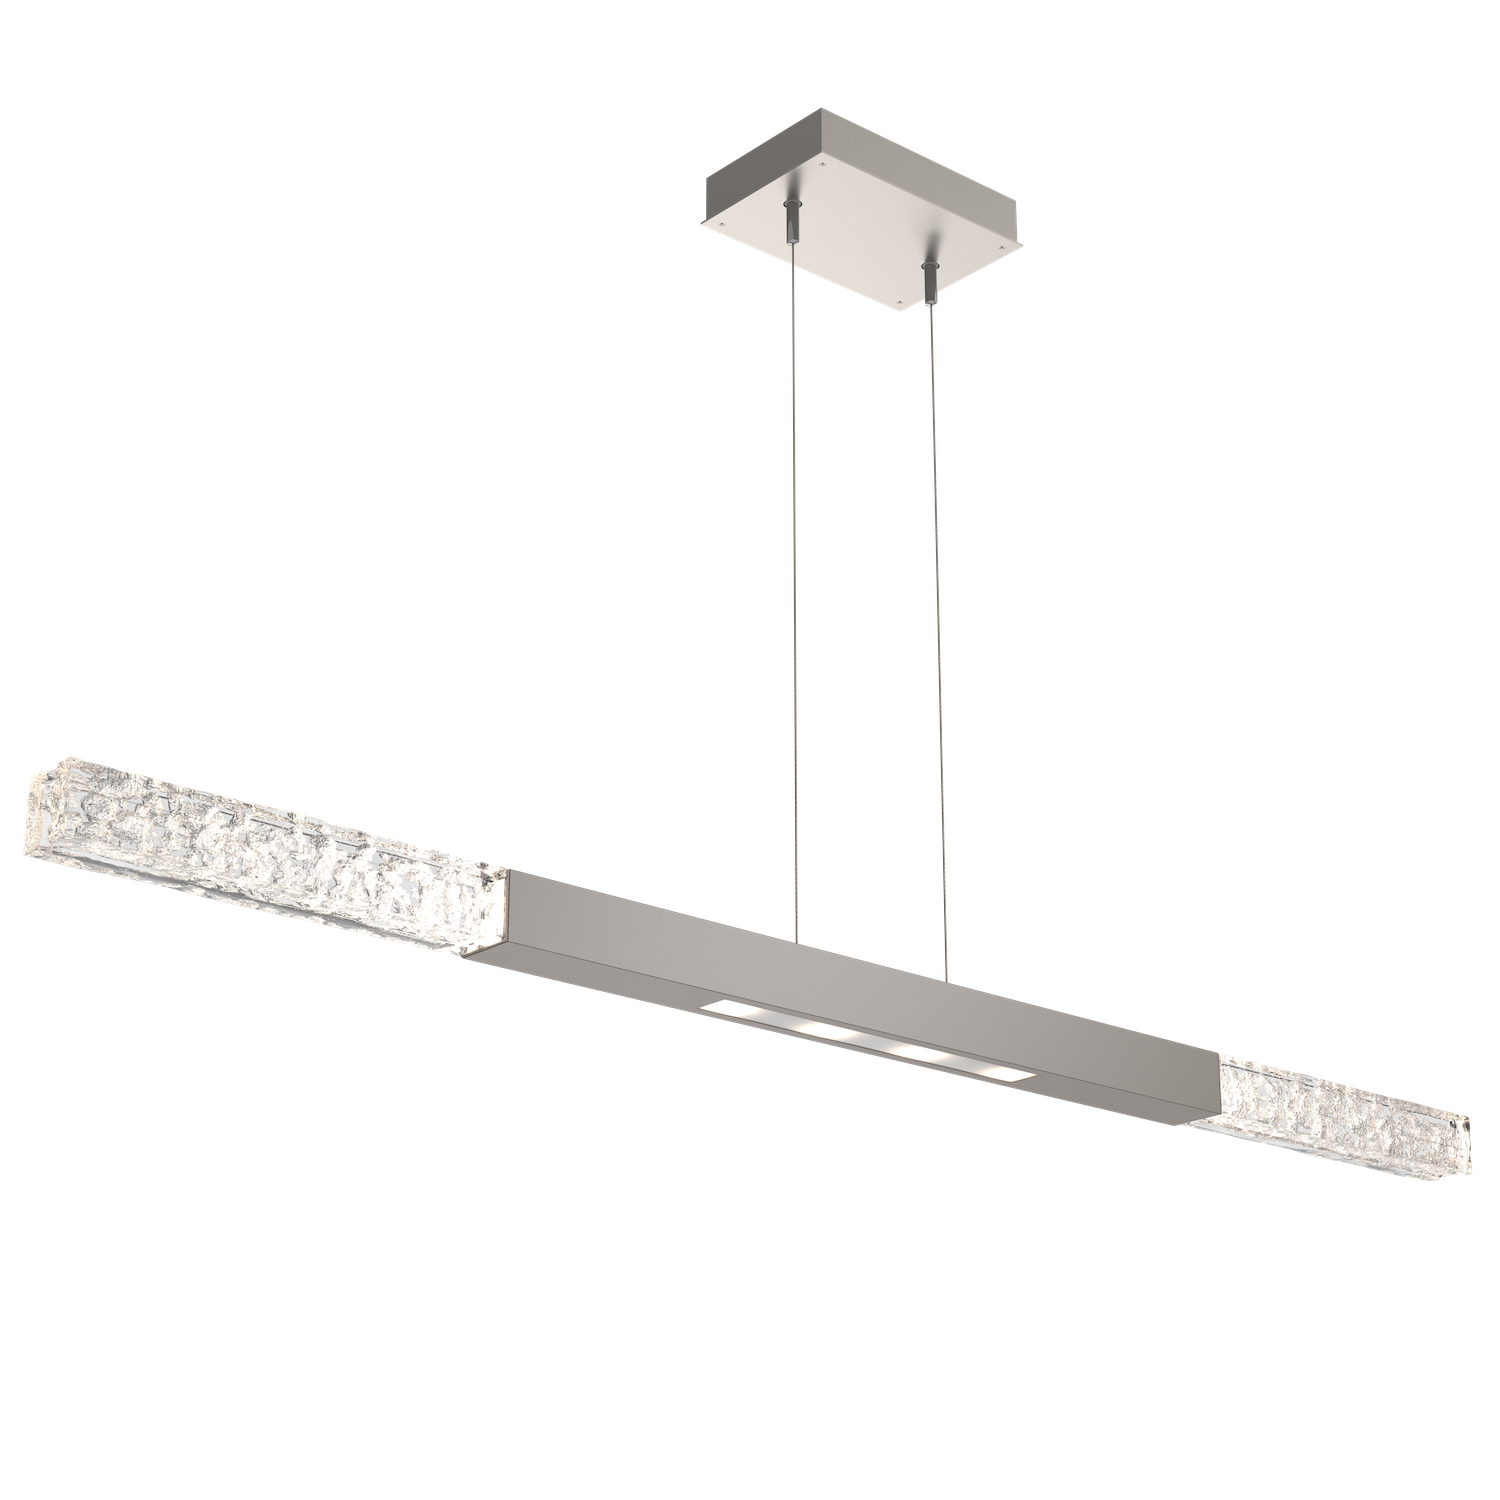 PLB0060-48-BS-GC-Hammerton-Studio-Axis-Moda-Single-48-inch-Linear-Chandelier-with-Metallic-Beige-Silver-finish-and-clear-cast-glass-and-LED-lamping